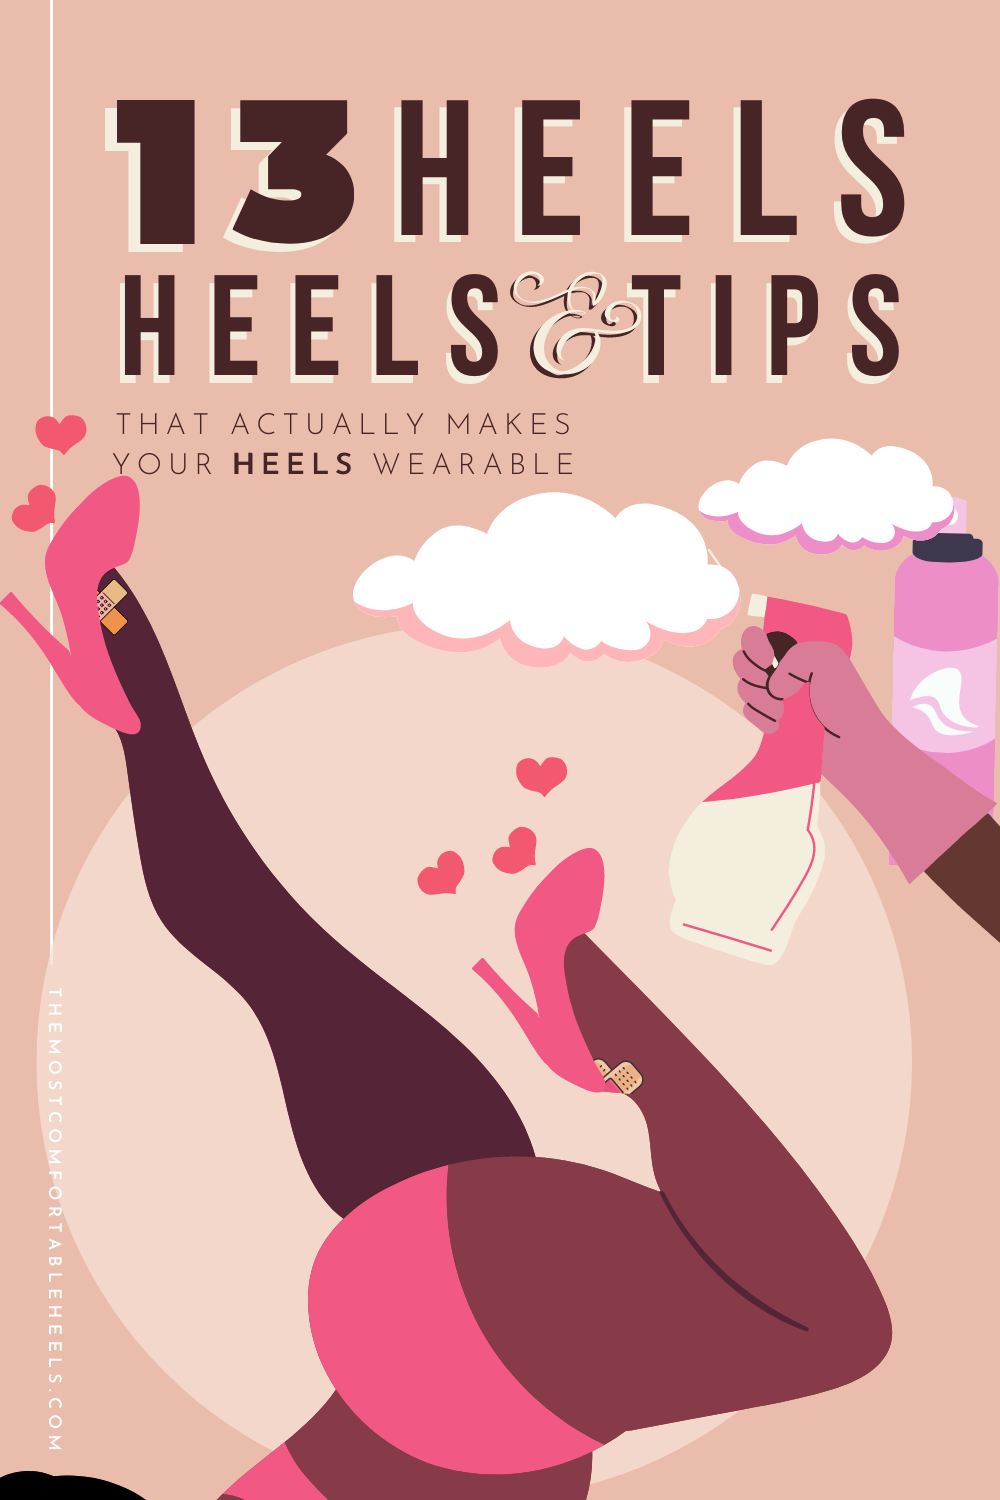 The 1 simple trick to make your high heels stop hurting